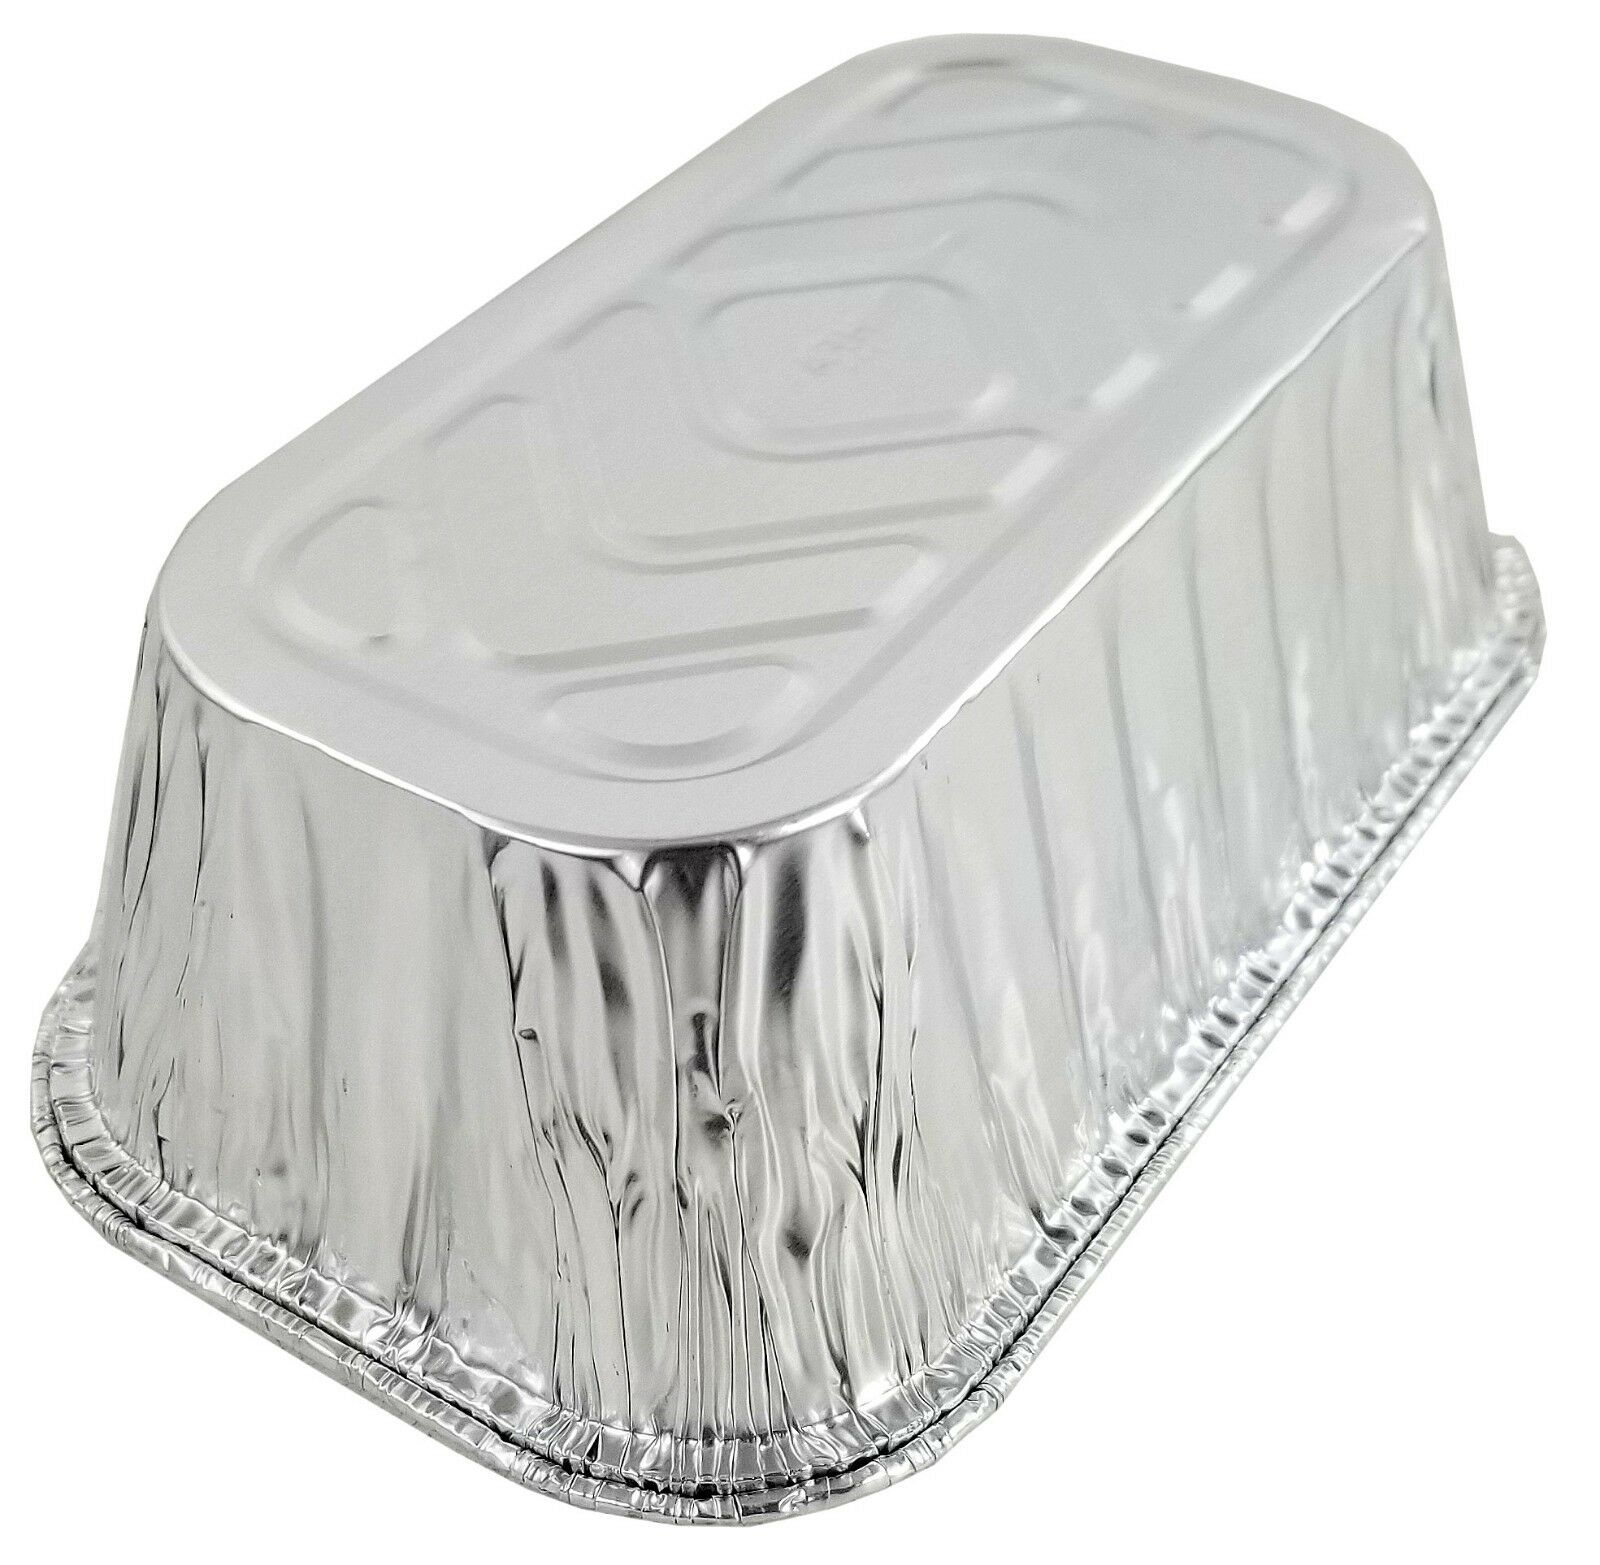 1 lb. Holiday Foil Loaf Pan with Dome Lid - #9302x, Red